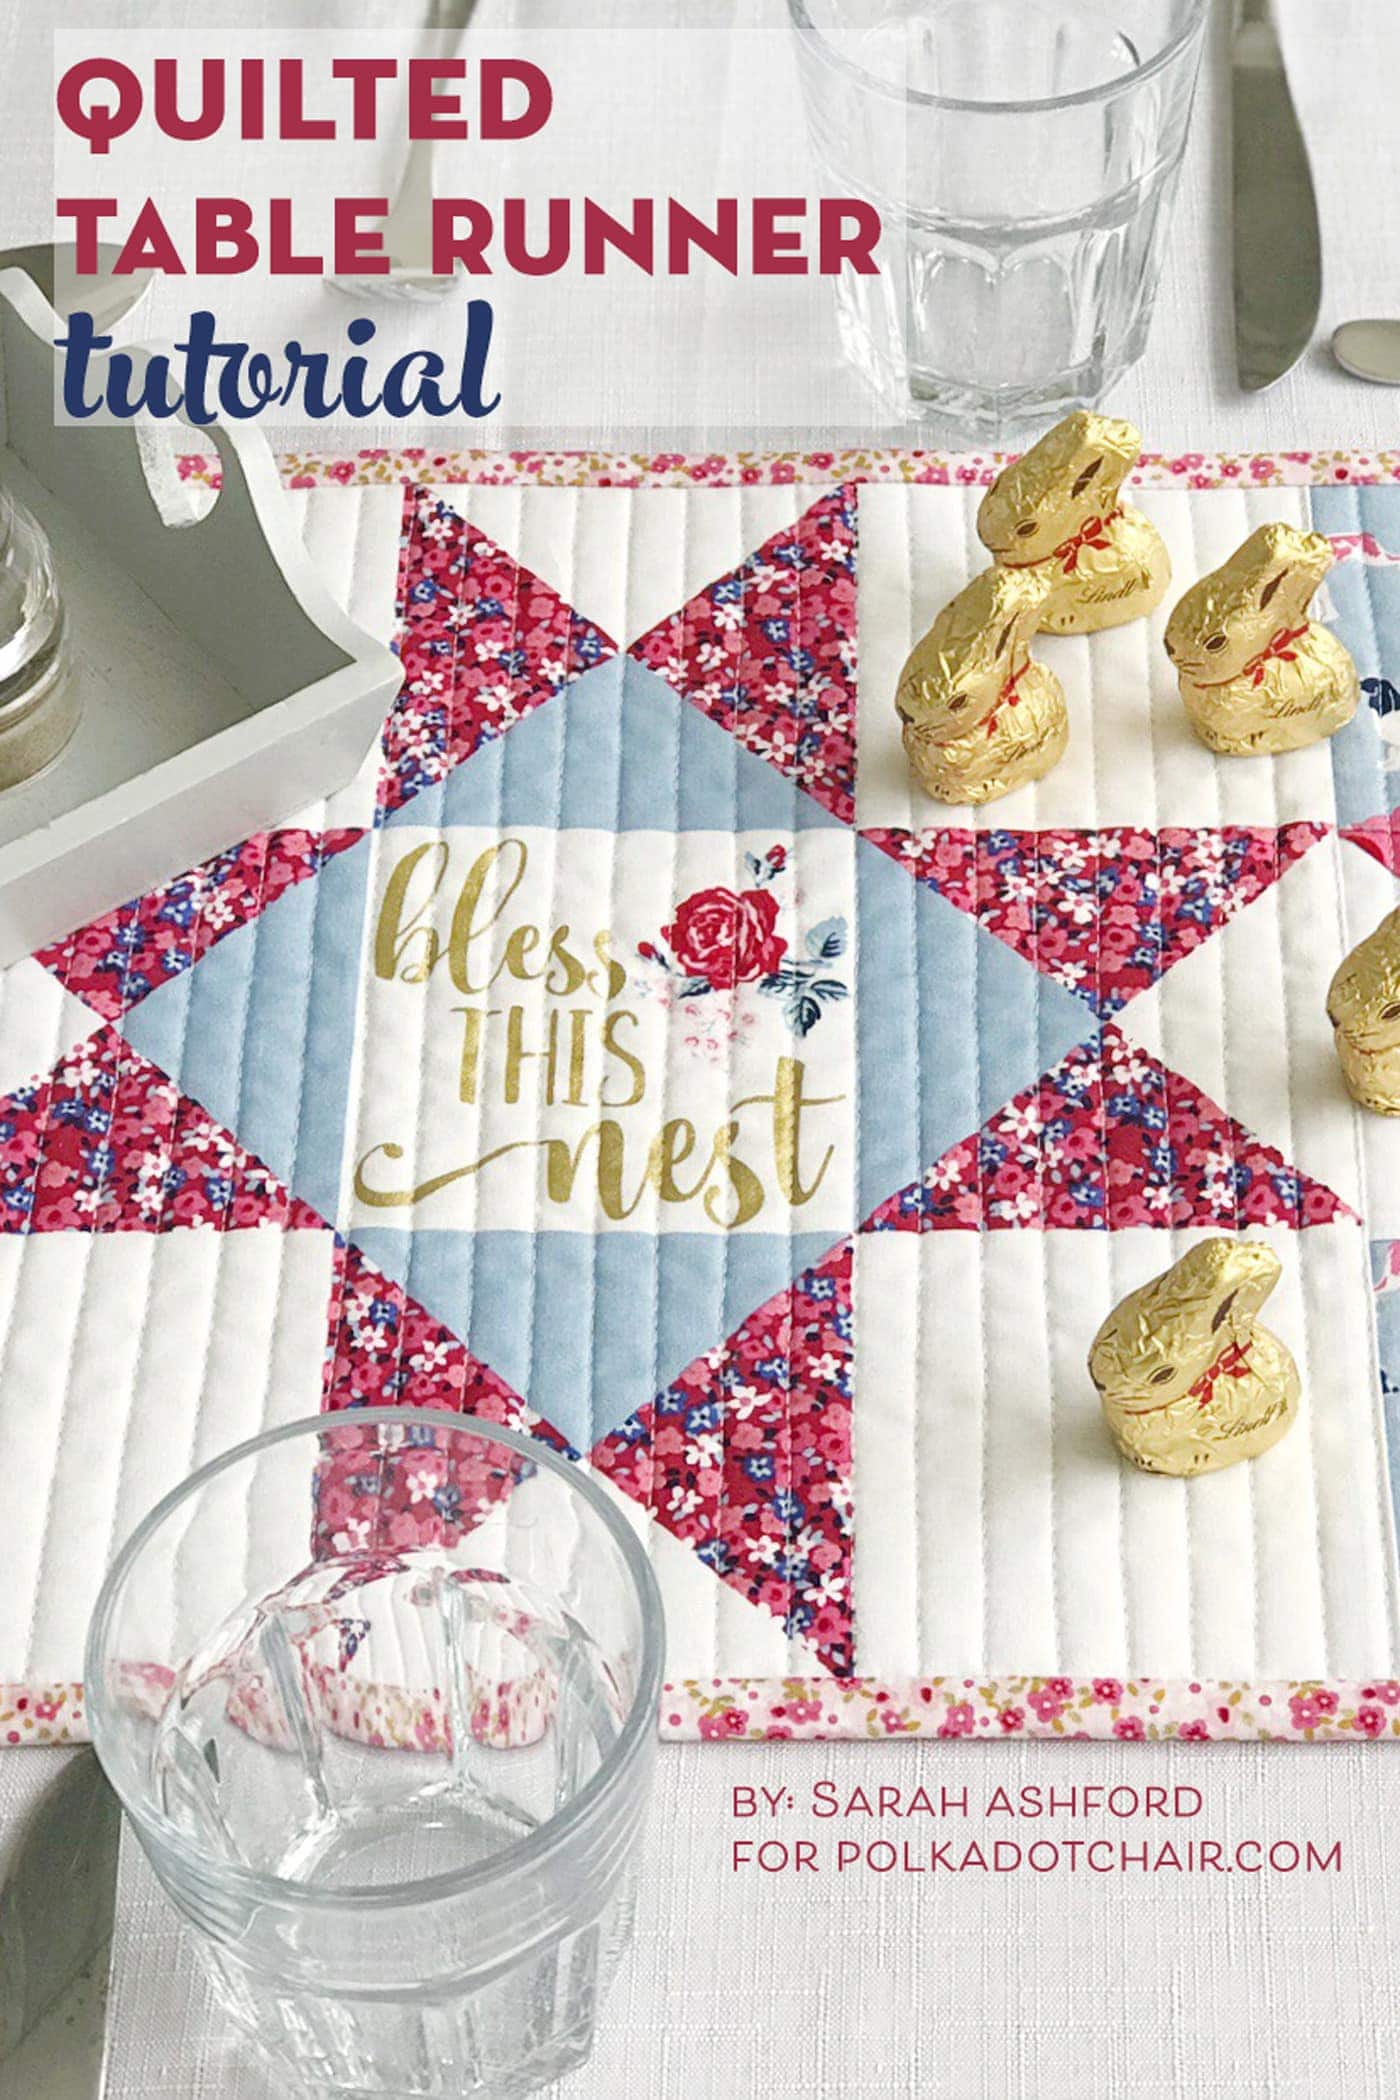 How to Make a Quilted Table Runner